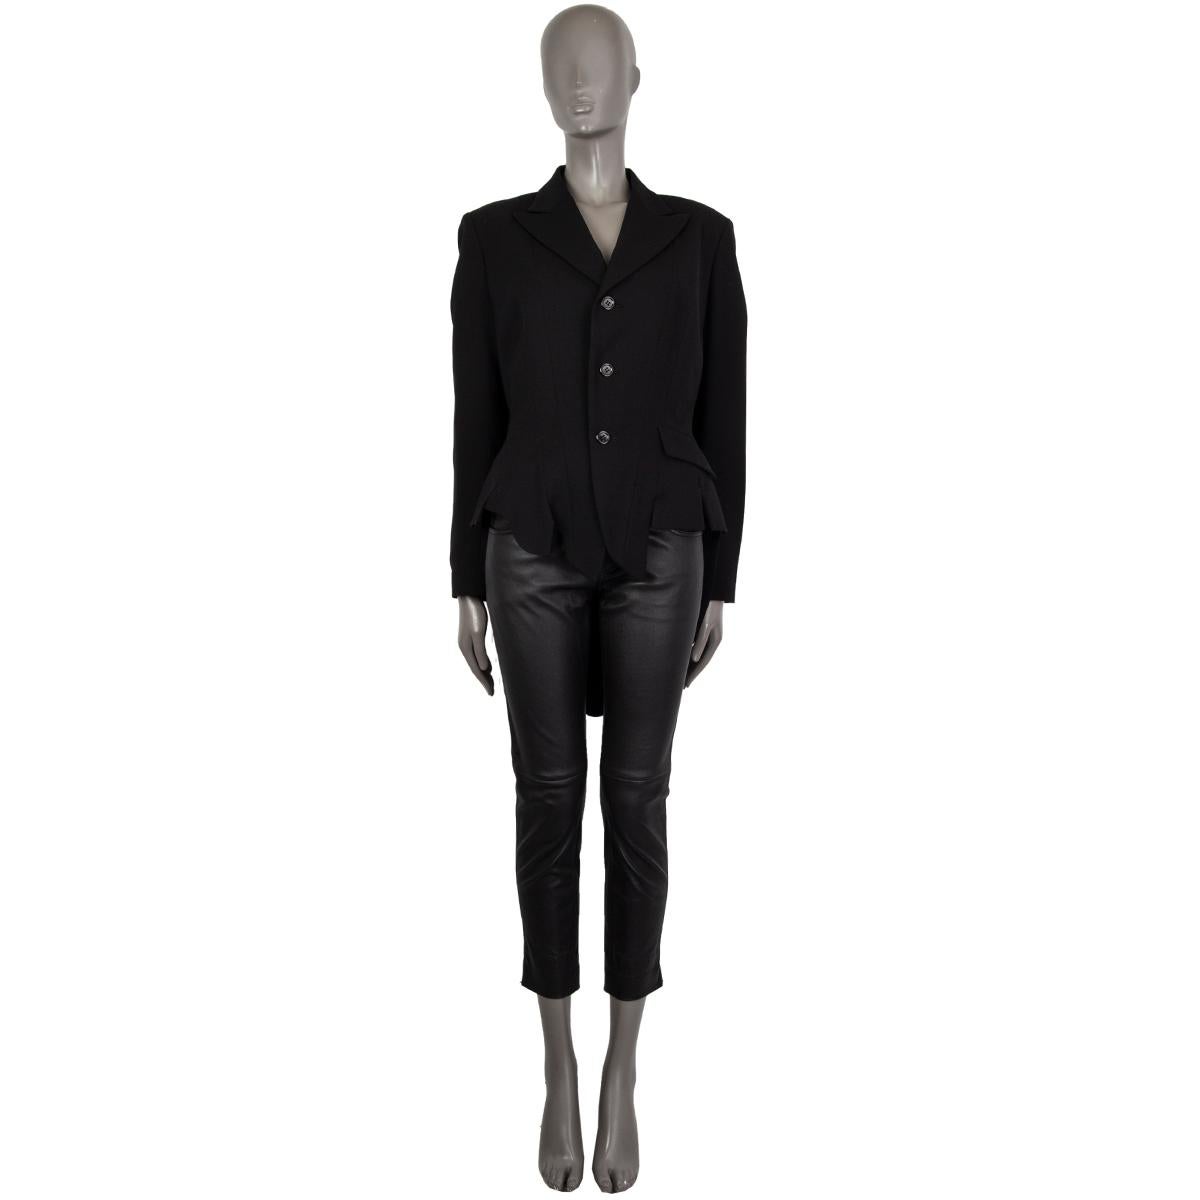 100% authentic Yohji Yamamoto fantasy hemline blazer in black virgin wool (100%) with a peak collar. Has one deocarative flap pocket on the front. Closes on the front with buttons. Lined in cupro (100%). Has been worn and is in excellent condition.